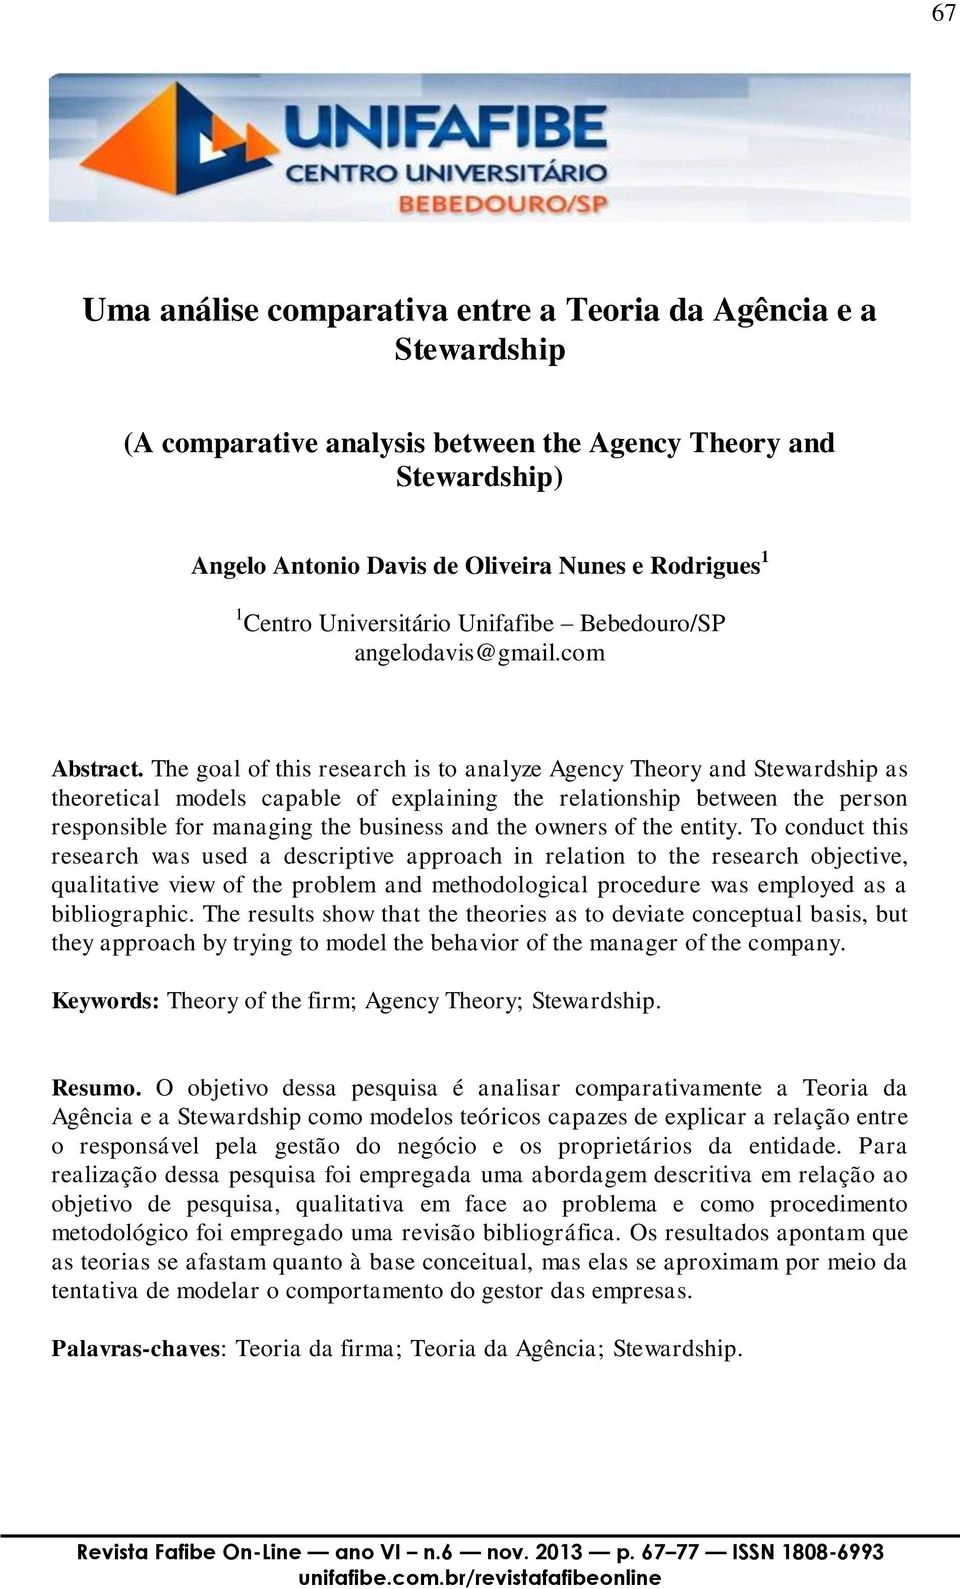 The goal of this research is to analyze Agency Theory and Stewardship as theoretical models capable of explaining the relationship between the person responsible for managing the business and the